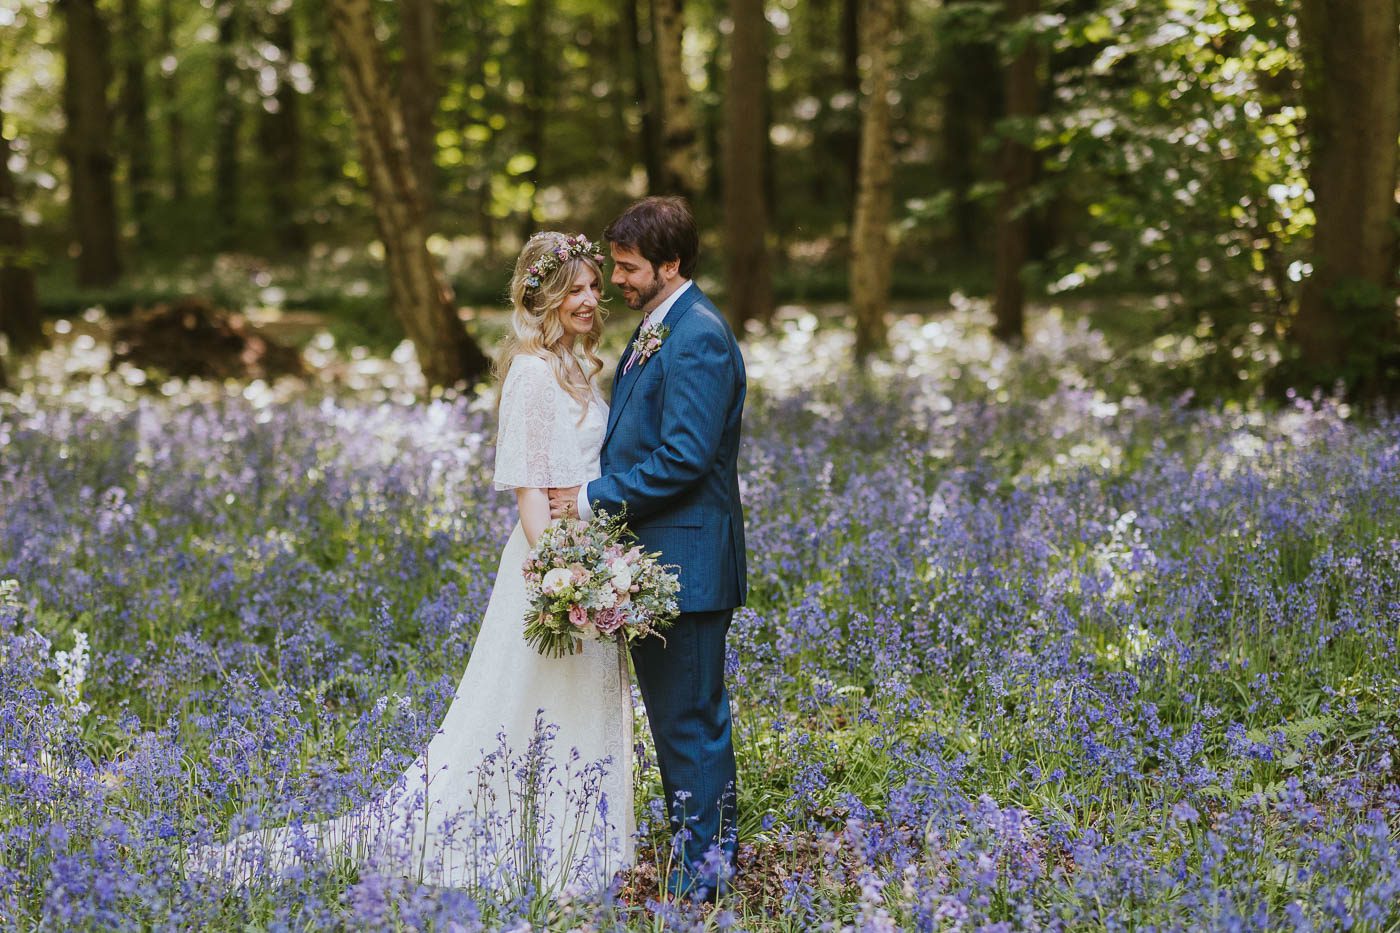 hazlewood castle wedding photography | relaxed photo of bride and groom in bluebell woods at hazlewood castle in yorkshire